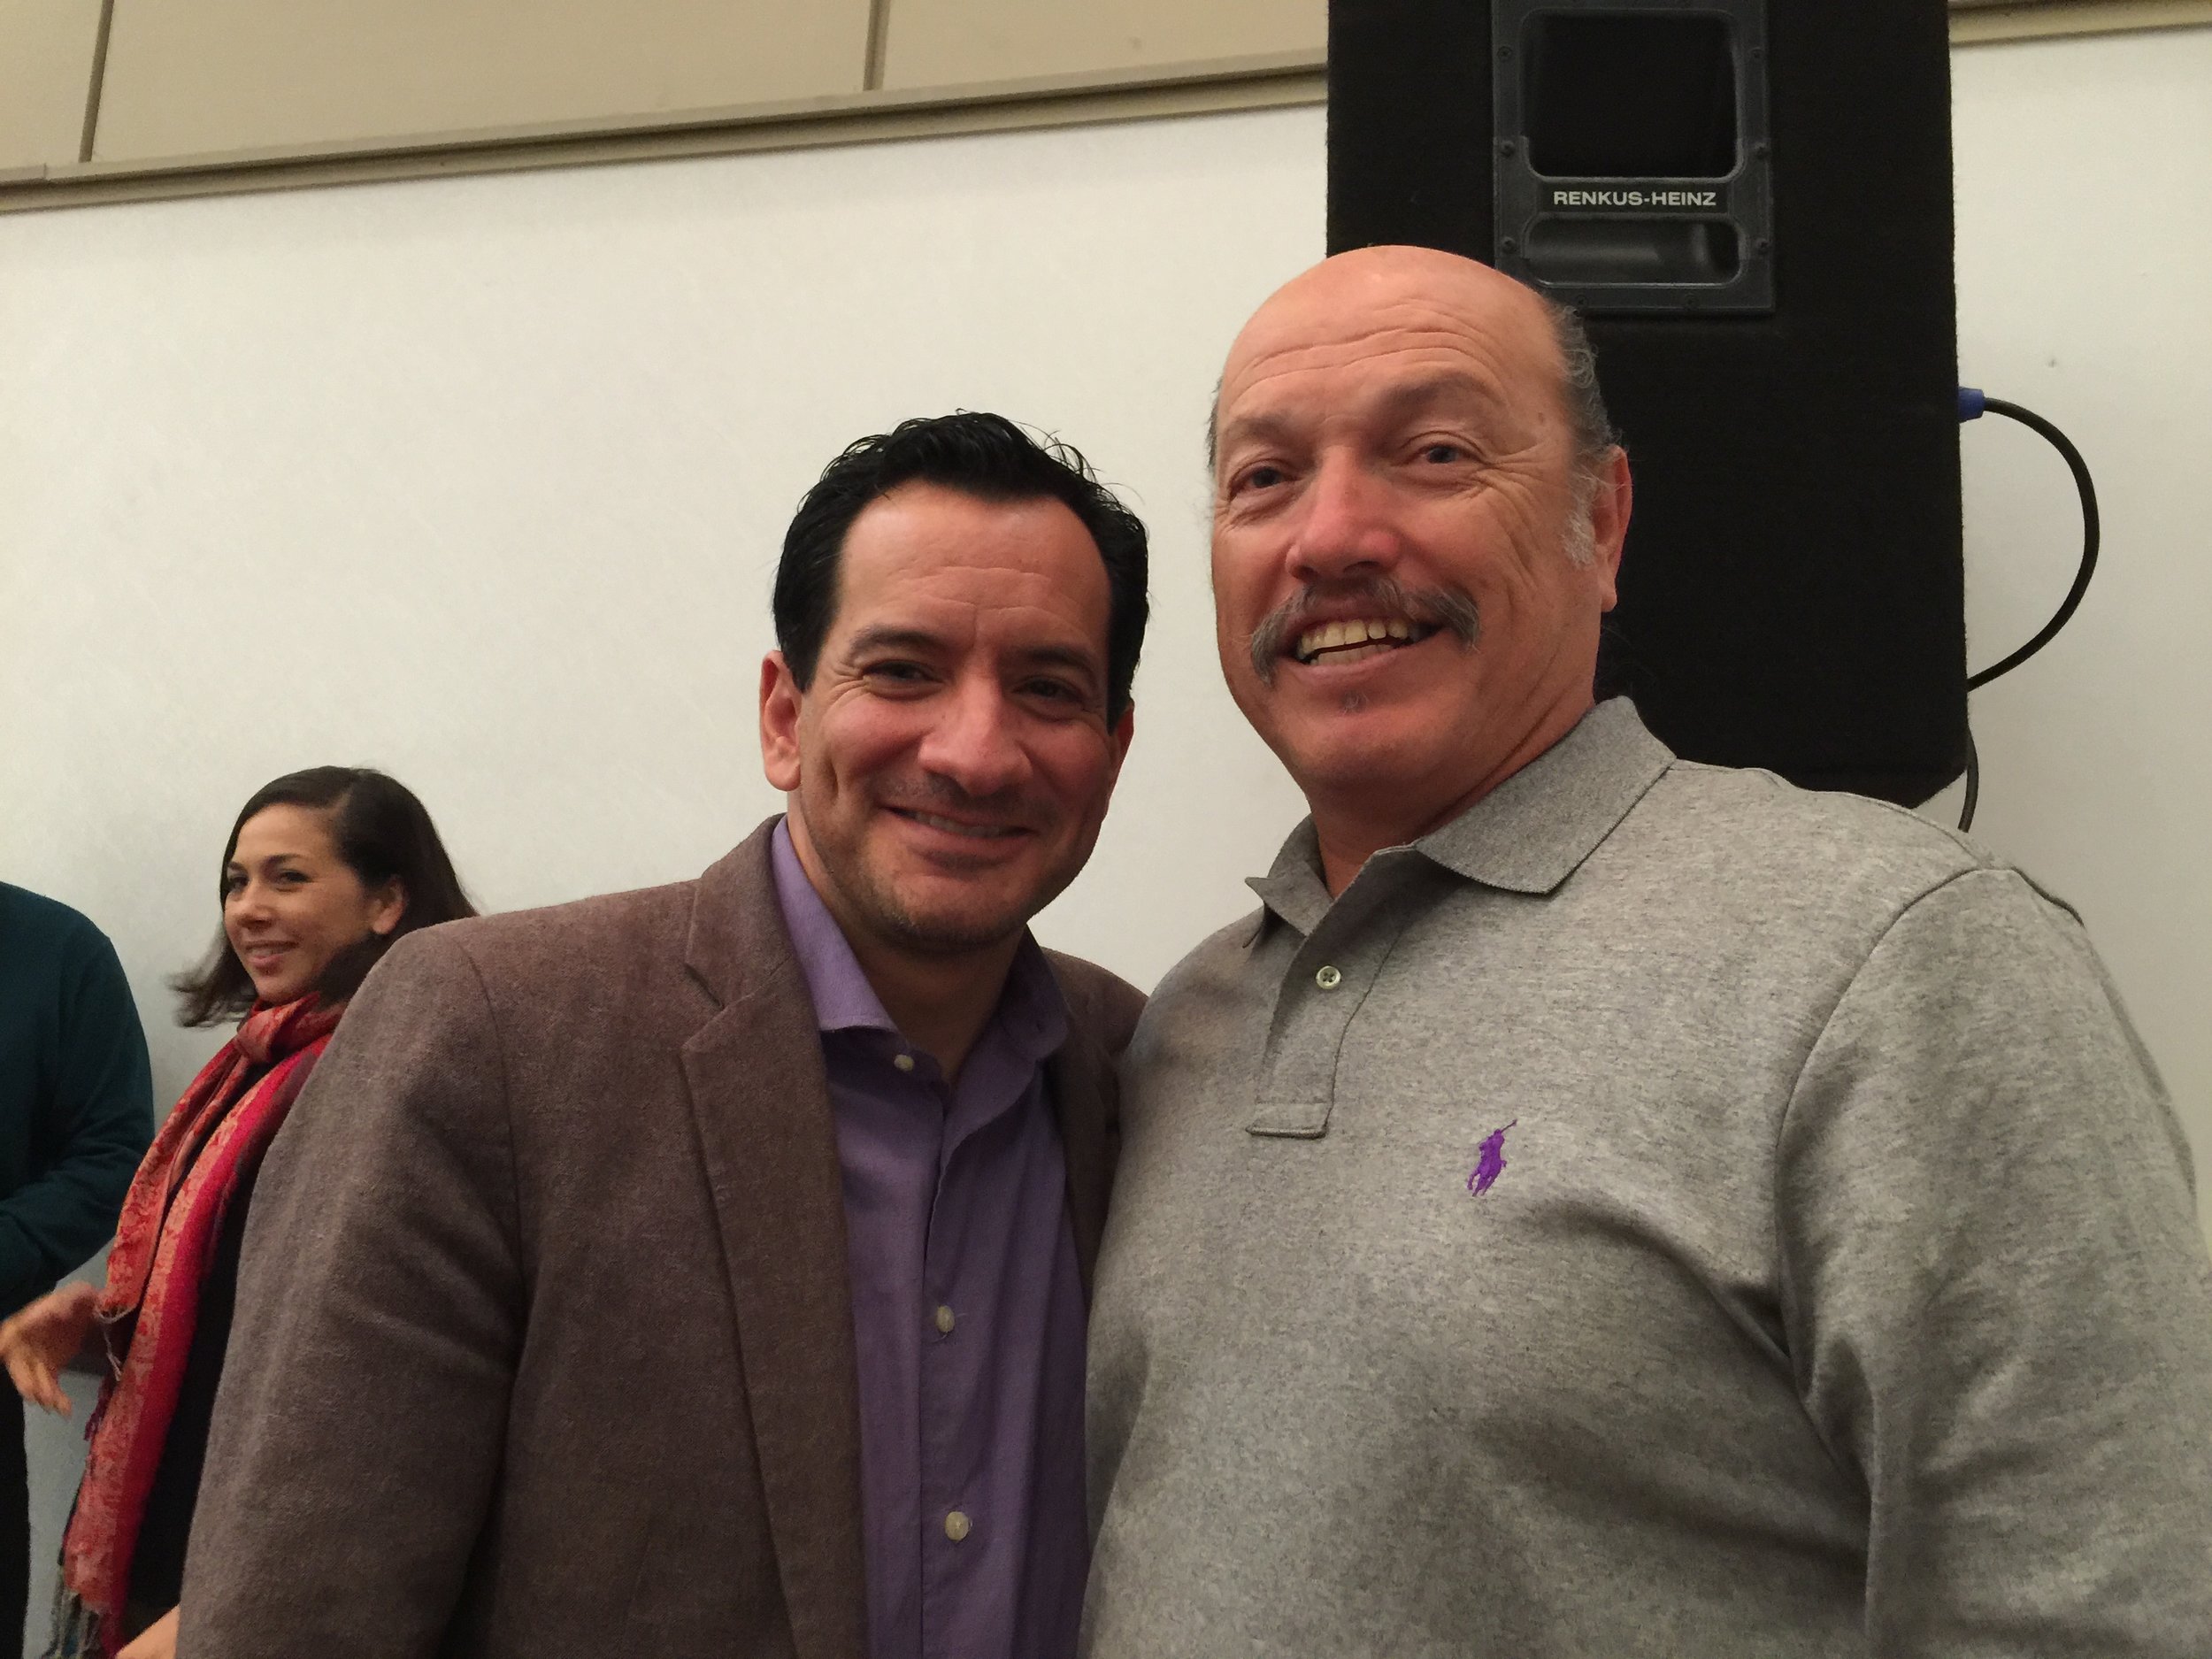 Tony with Speaker of the Assembly Anthony Rendon